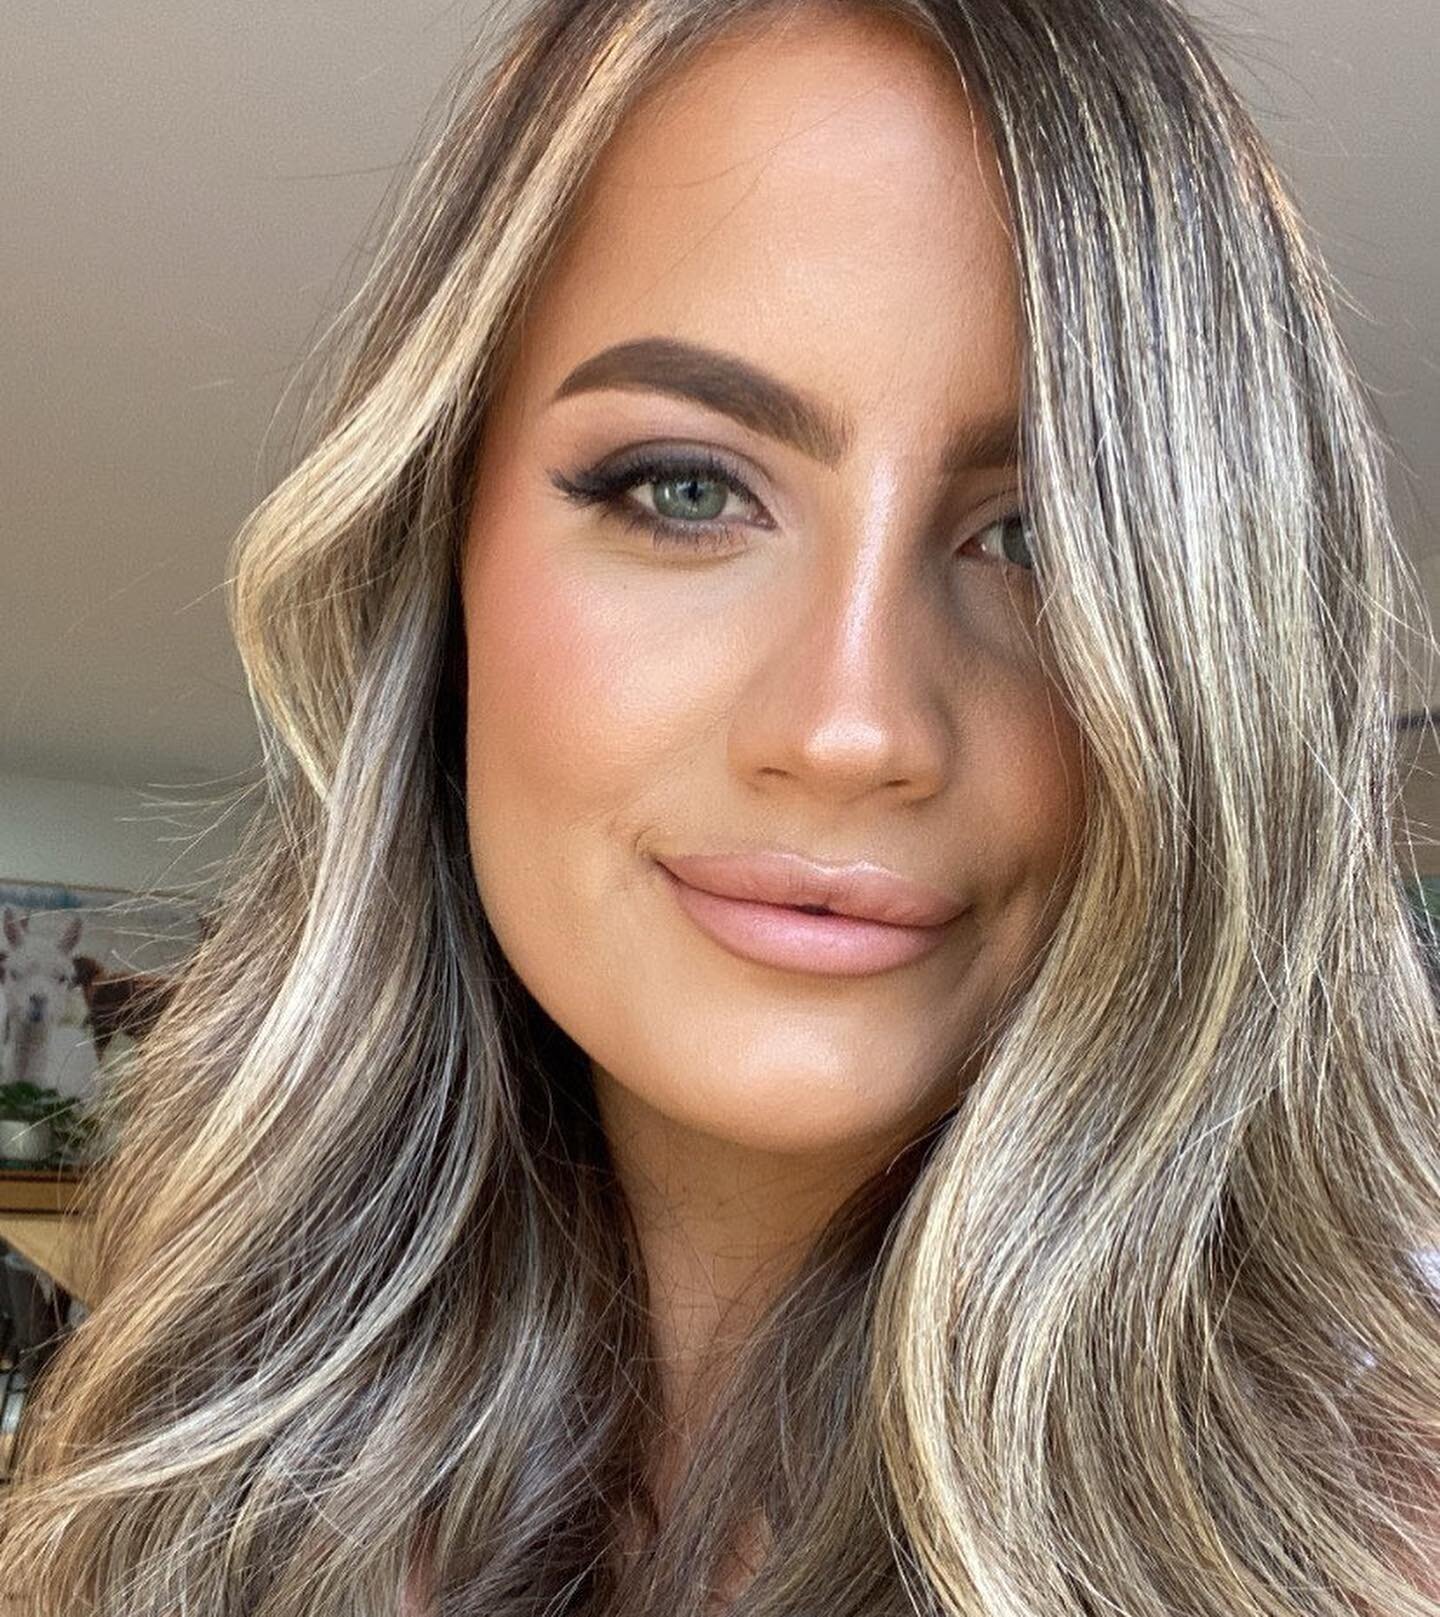 Start your Thursday off by admiring this absolute beauty! 😮 🔥 😍 @jessiemartini  XXX makeup by our queen @ns.makeupartistry 💕 We are loving the smoked wing! 😏 &amp; of course we are using @mooiemakeup Foundation. We have stock available in the st